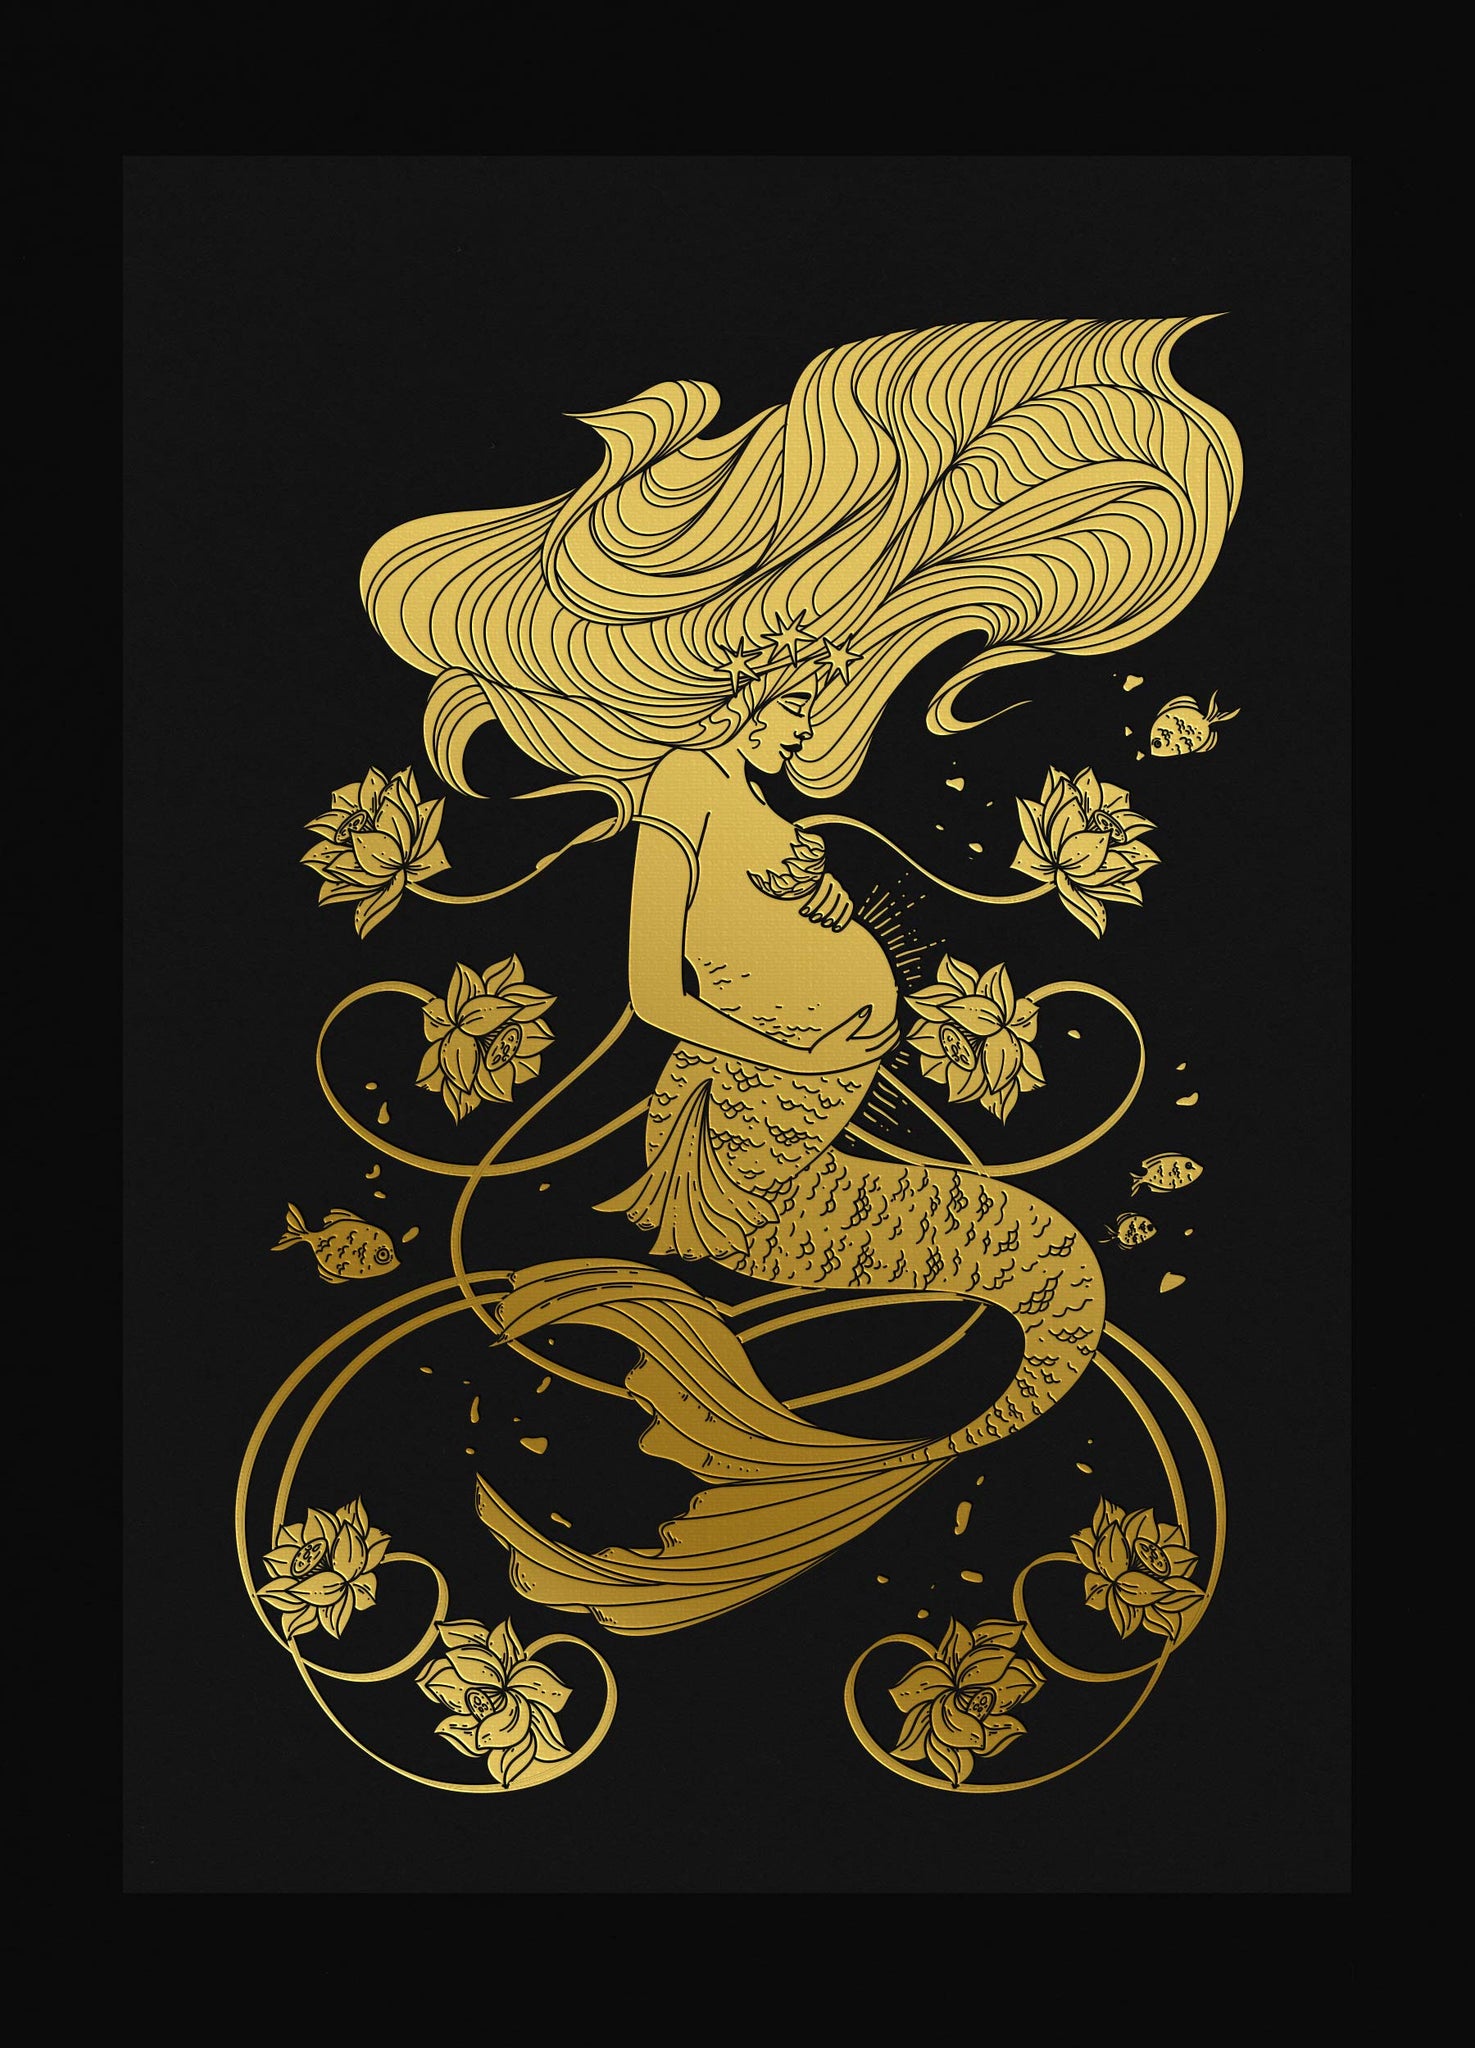 Mermaid mother art print gold foil on black paper by Cocorrina